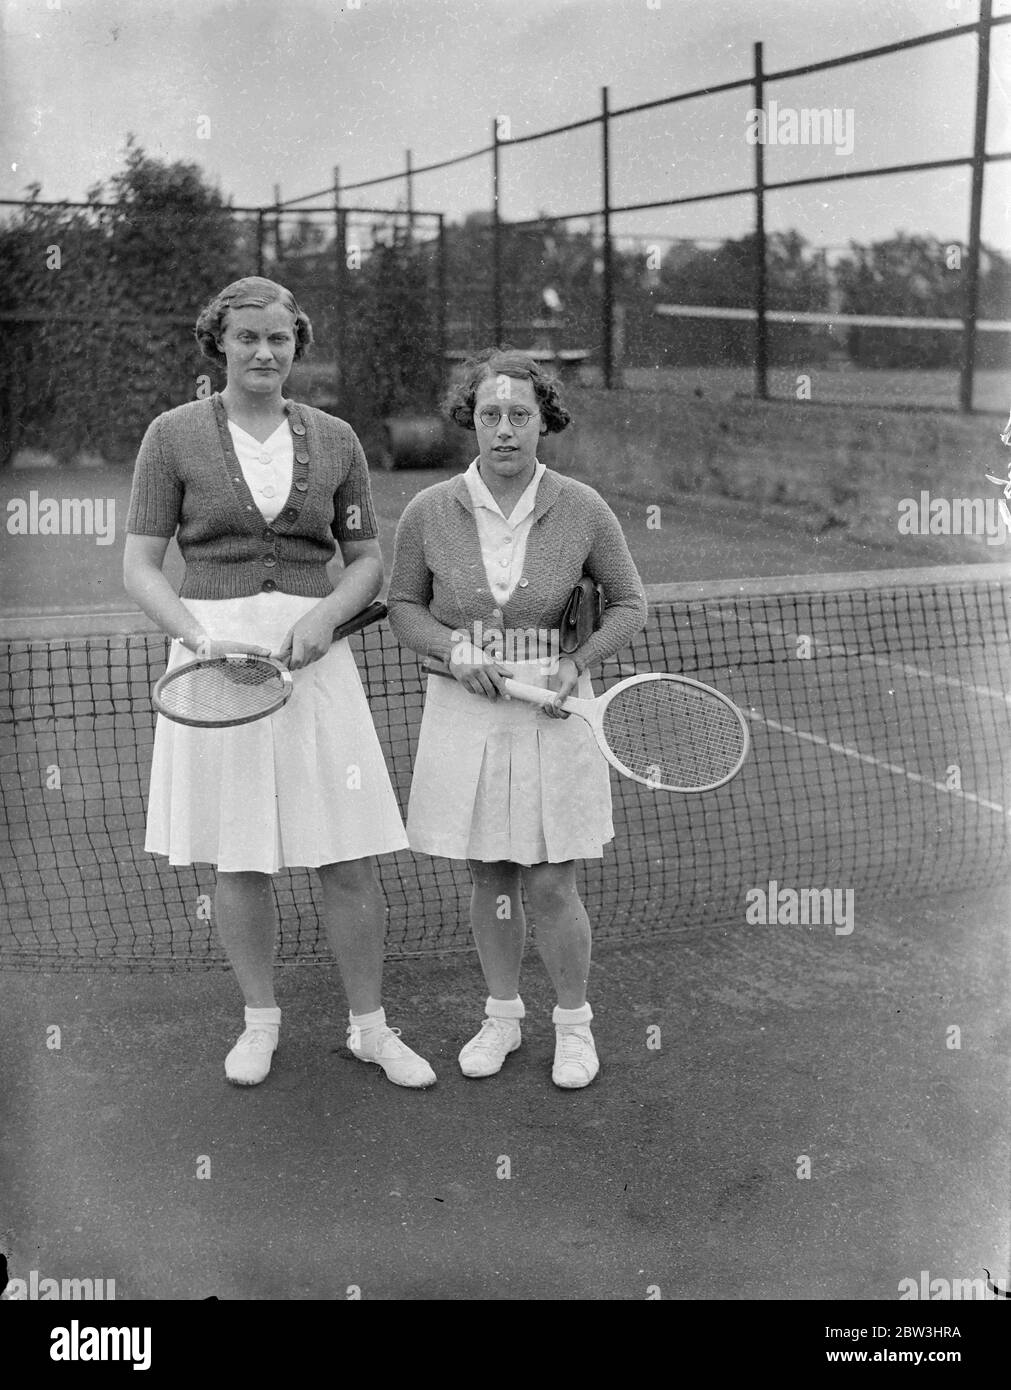 Star tennis semi finals at Dulwich lawn tennis club . Miss M Whiteley of Ealing ( left ) and Miss B Bourne of Acton , semi finalists in the Ladies Singles of the Star Tennis tournament . 25 July 1936 Stock Photo